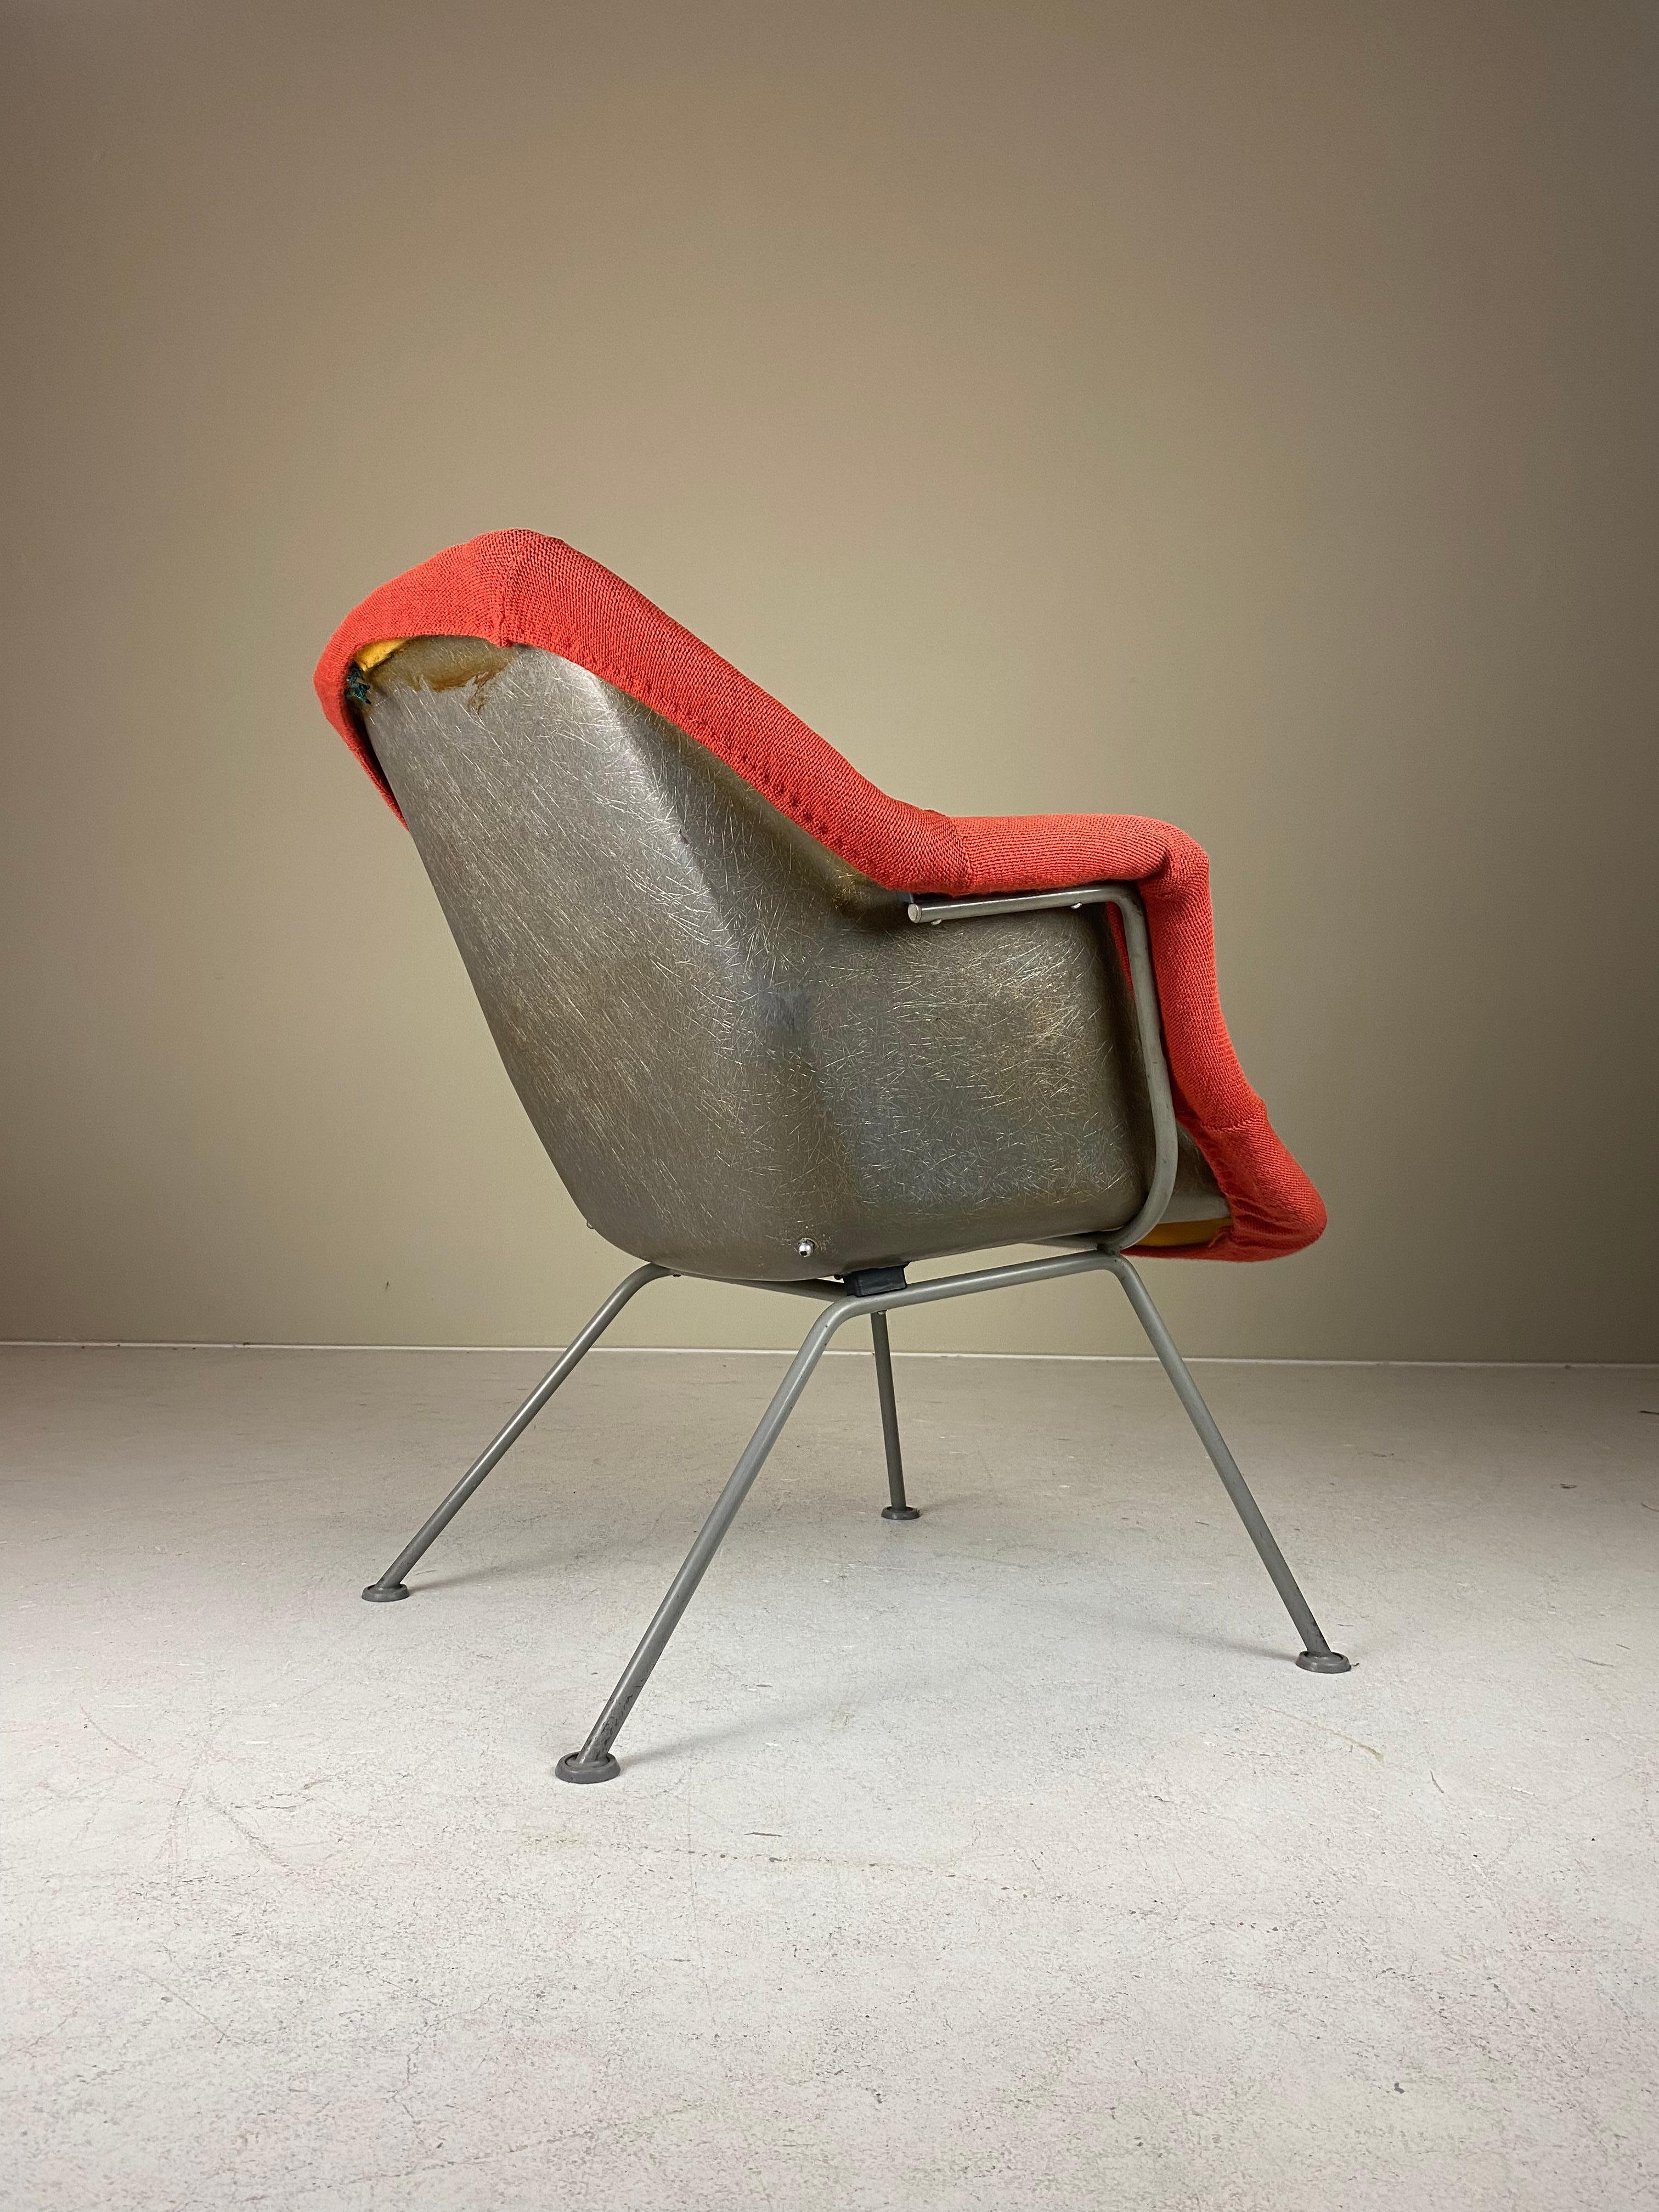 Listed is a unique set of two model no. 416 armchairs, designed by Wim Rietveld (son of Gerrit Rietveld) and Andre Cordemeyer in 1957. It was the first Dutch polyester armchair ever made out of one piece of molded polyester, reinforced with glass